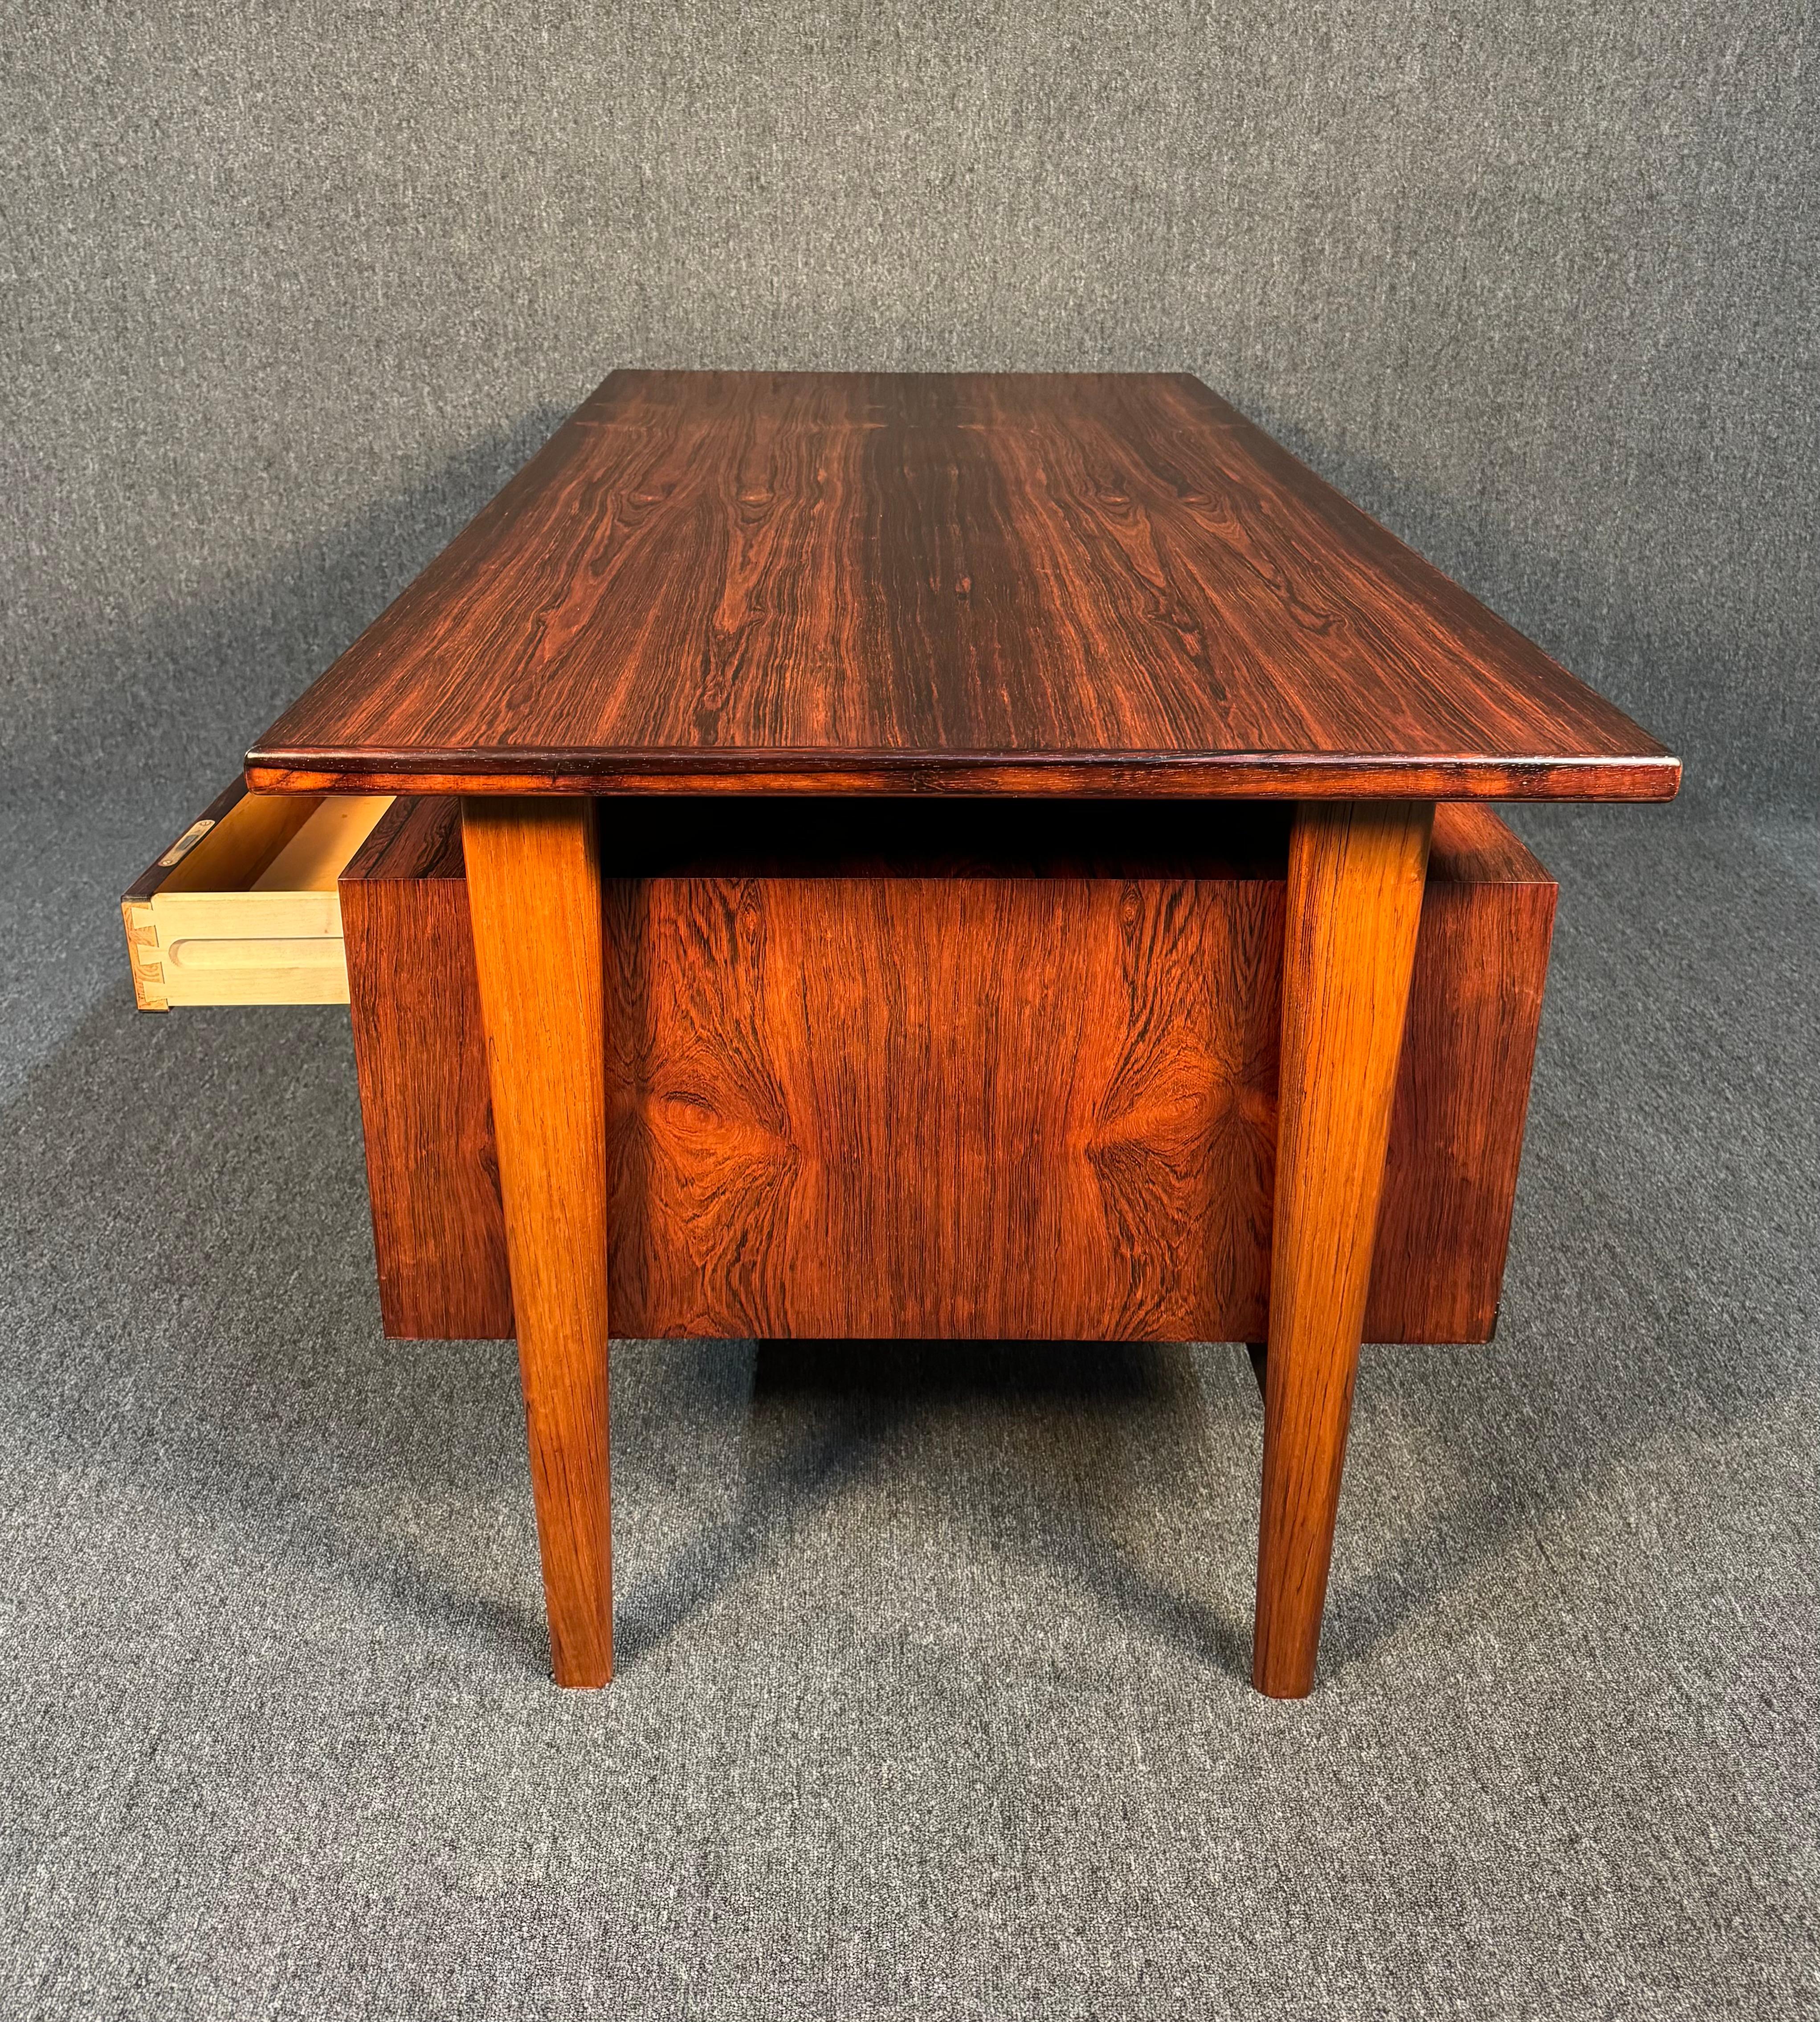 Here is a sought after Scandinavian Modern executive floating desk Model FM60 in rosewood designed by Kai Kristiansen and manufactured by Feldballe's Møbelfabrik in Denmark in the 1960's. This desk, recently imported from Europe to California before